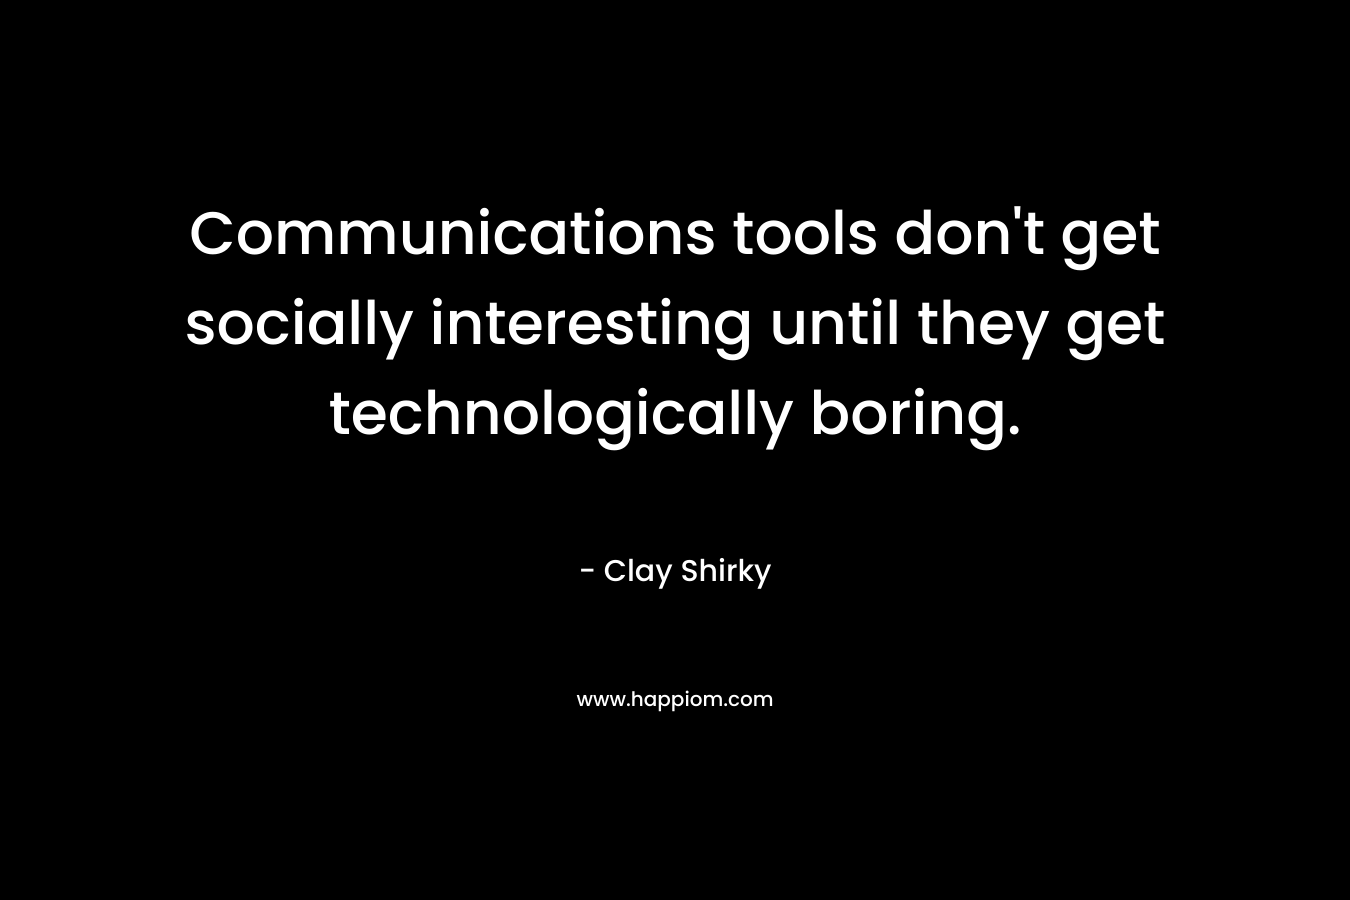 Communications tools don't get socially interesting until they get technologically boring.